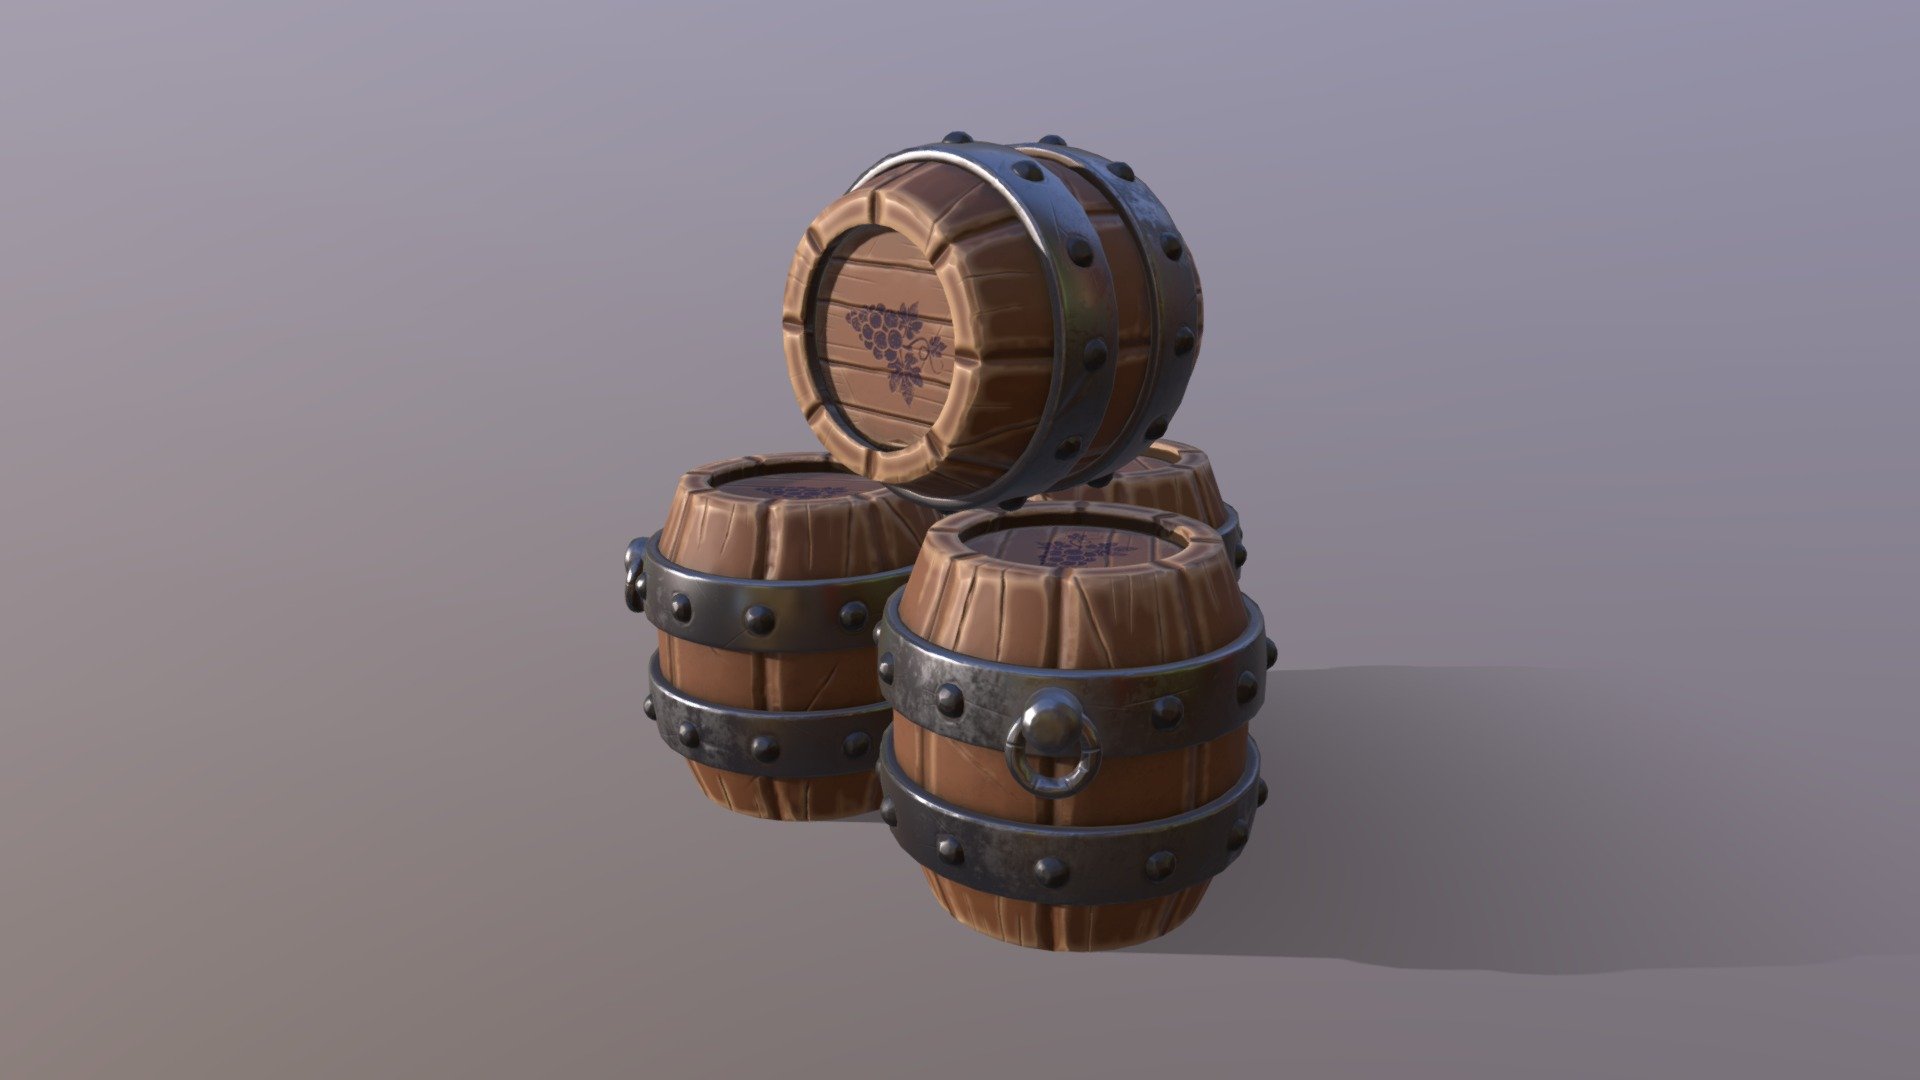 Lowpoly Stylized Barrel




Barrel game ready asset is a high quality, low poly asset originally modeled in blender 3.0.0

The normal map was baked from a high poly model (sculpted in ZBrush) in Substance Painter 2021, making this model look very detailed without using many polygons.

This model is intended for game/real time/ usage/close-UPS/illustraions/various renderings.

Optimized for games (game ready).

This model is not intended for subdivision.

Modelled in Blender.

Textured in Substance Painter.

Sculpted in ZBrush.

All materials and objects named appropriately.

Tested in Marmoset Toolbag 4.

No special plug-ins needed to use this product.

Specifications




Texture Size: 4096x4096

Textures format: PNG

Textures: 4

Materials: 1

Source format: fbx
 - Barrels - Download Free 3D model by RipeR 3d model